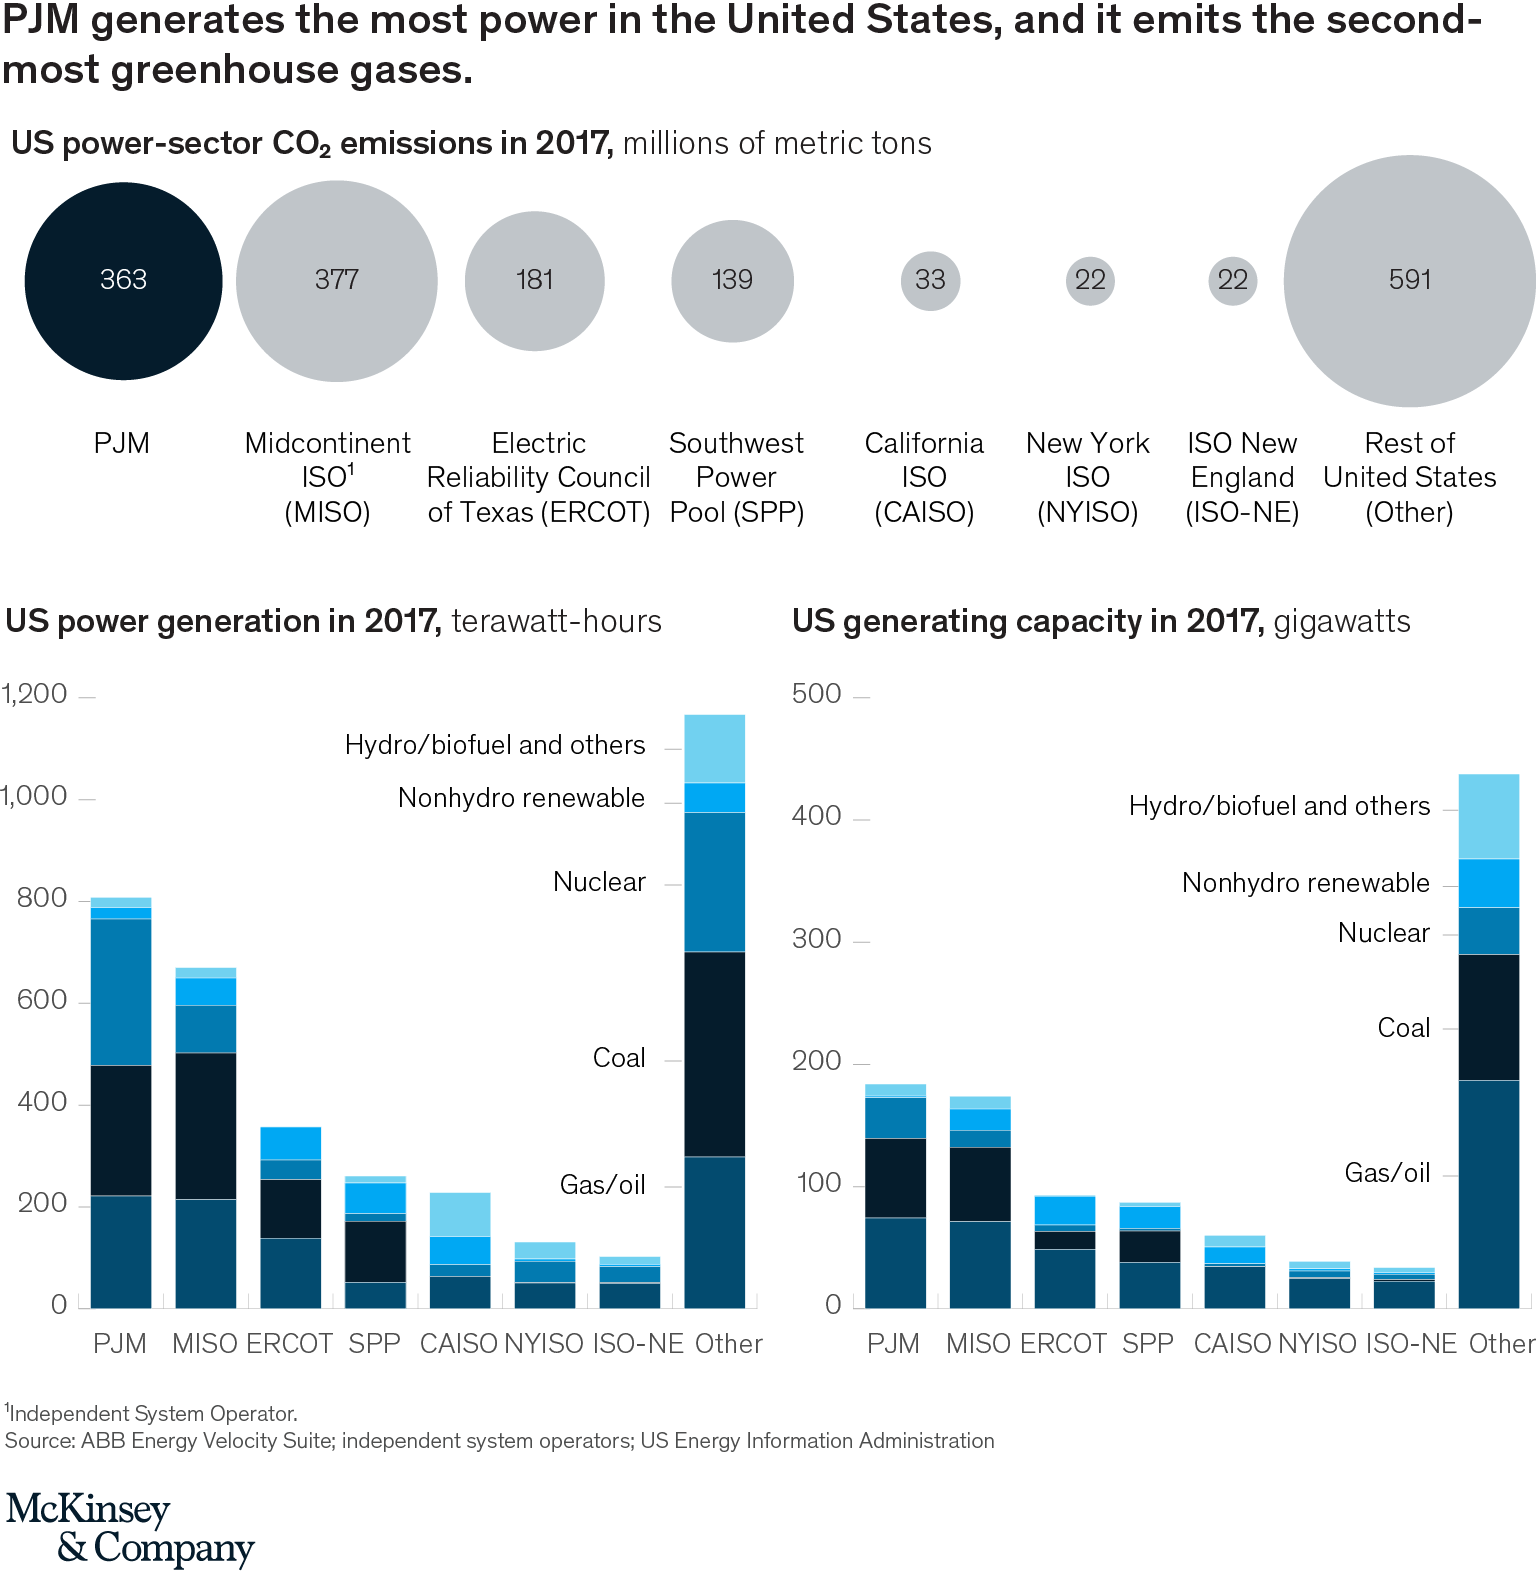 A 2040 vision for the US power industry: Evaluating two decarbonization scenarios